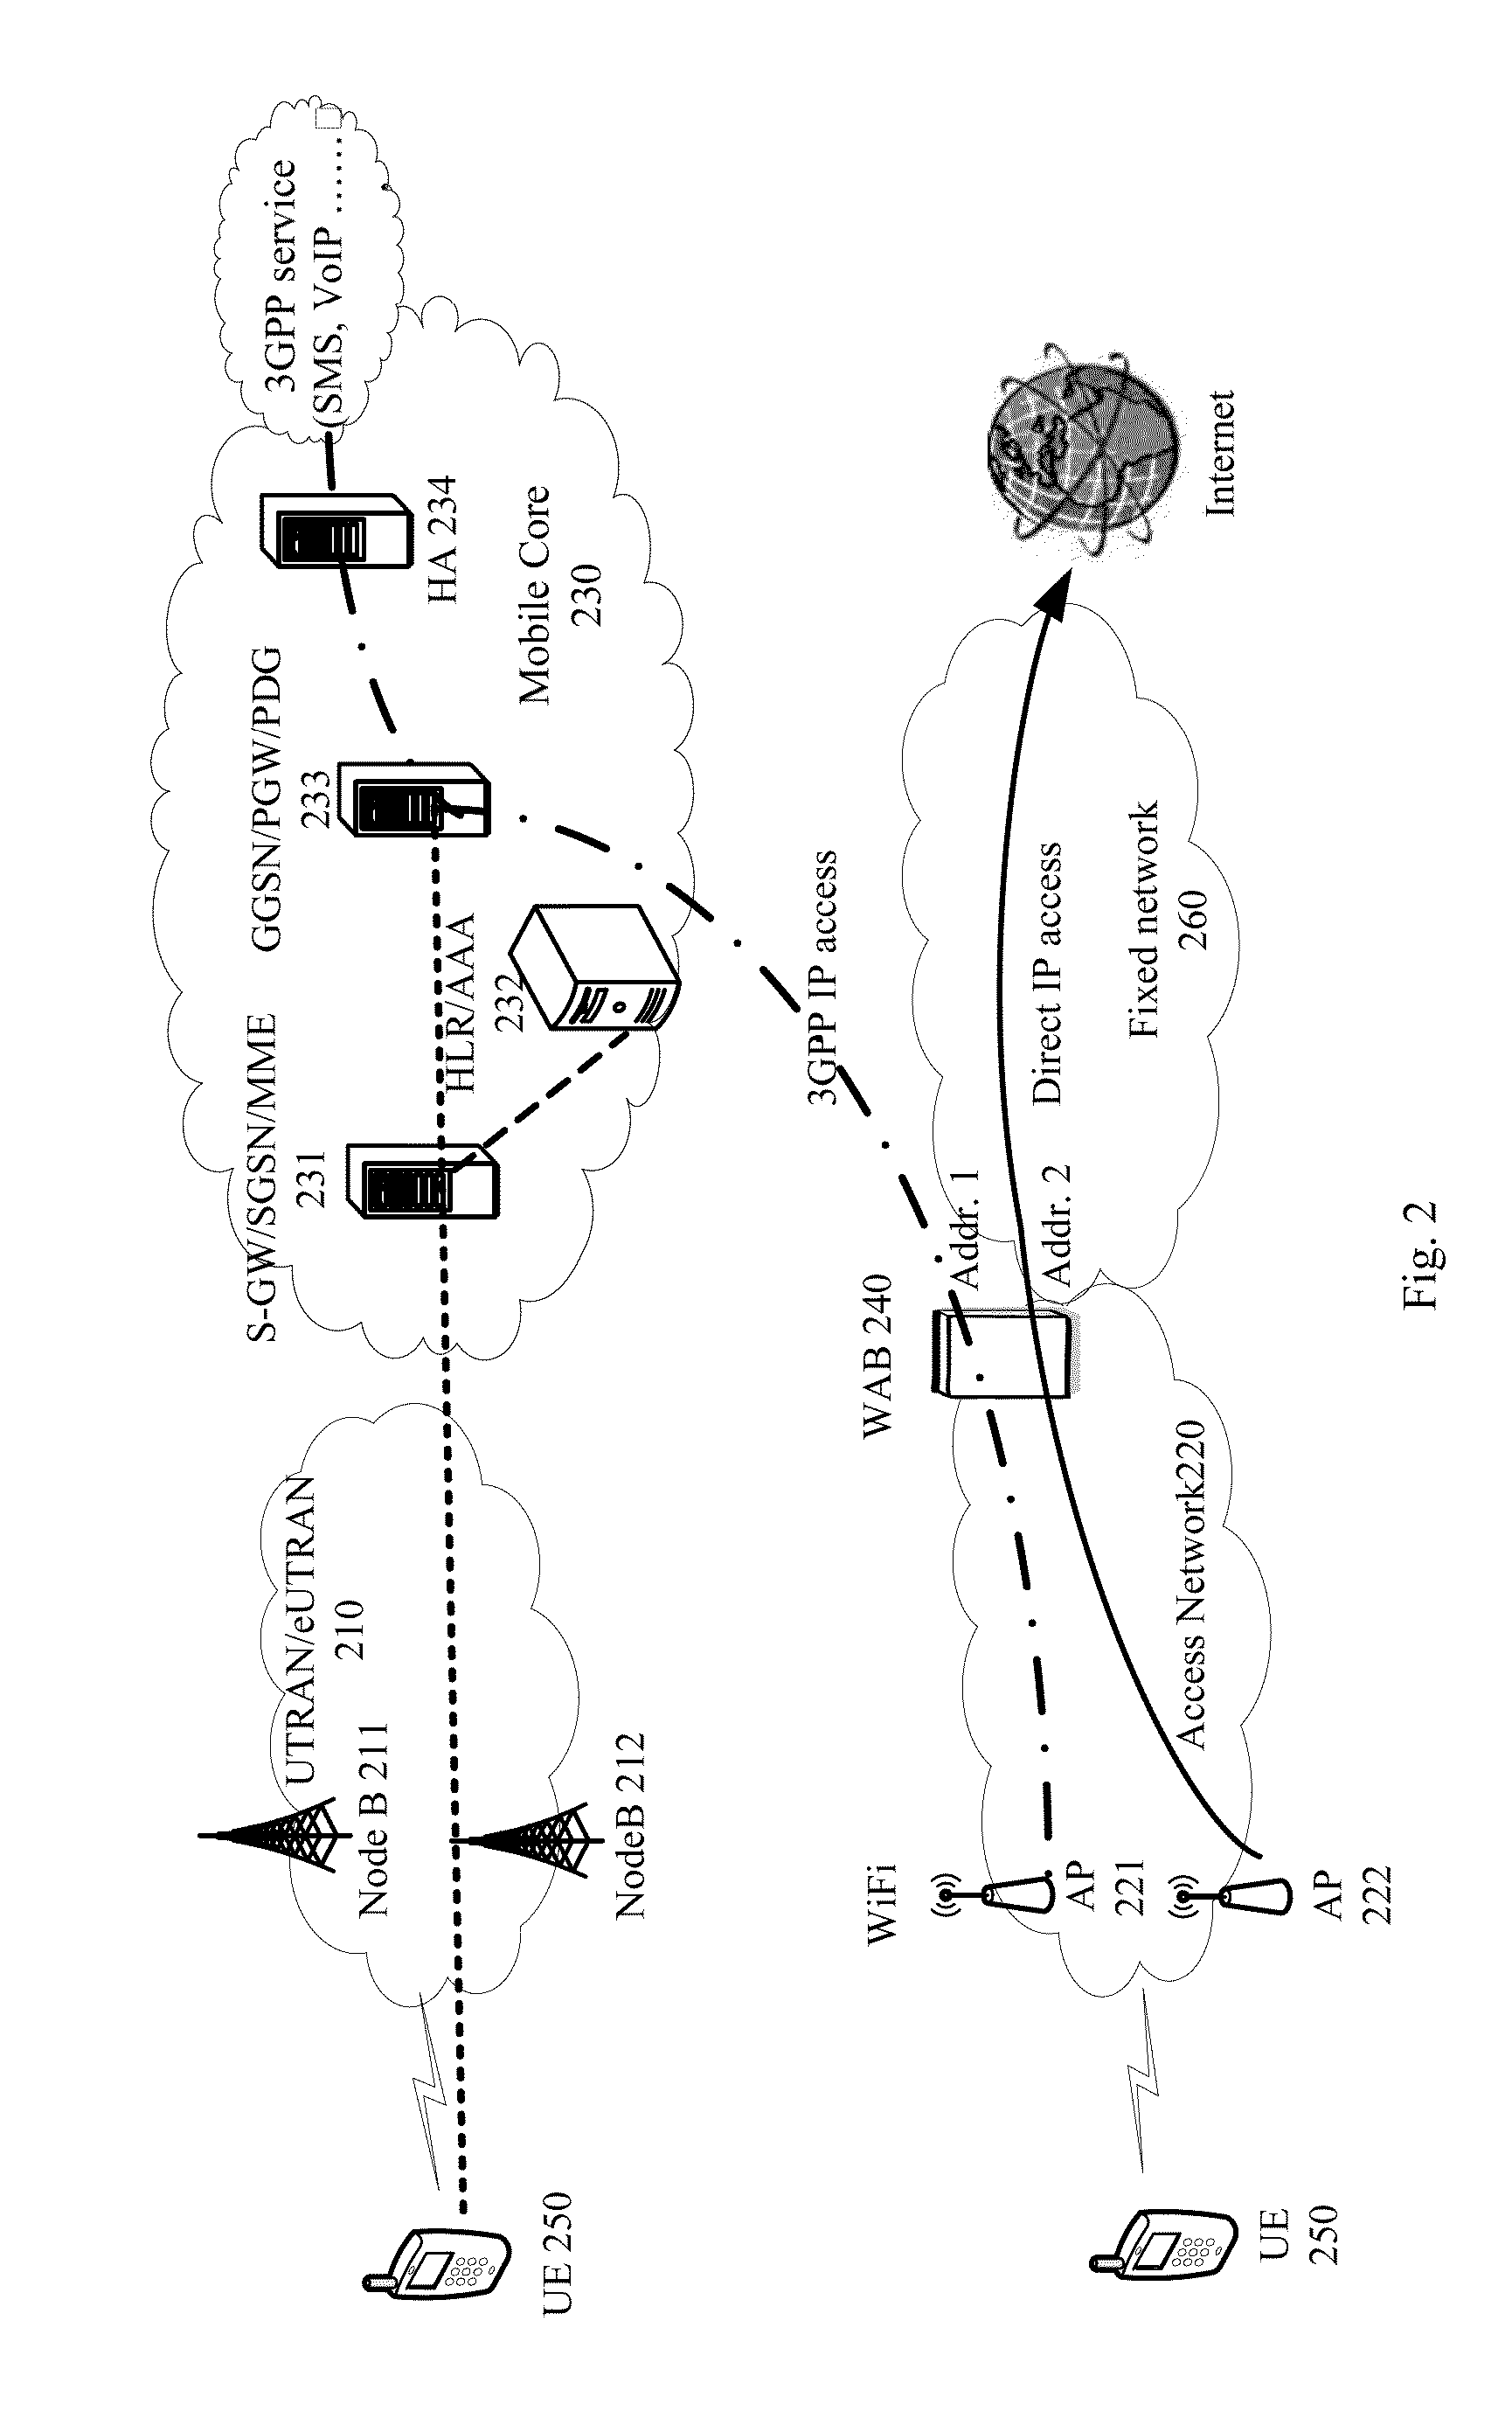 Method of communication under network condition converging cellular network and WLAN